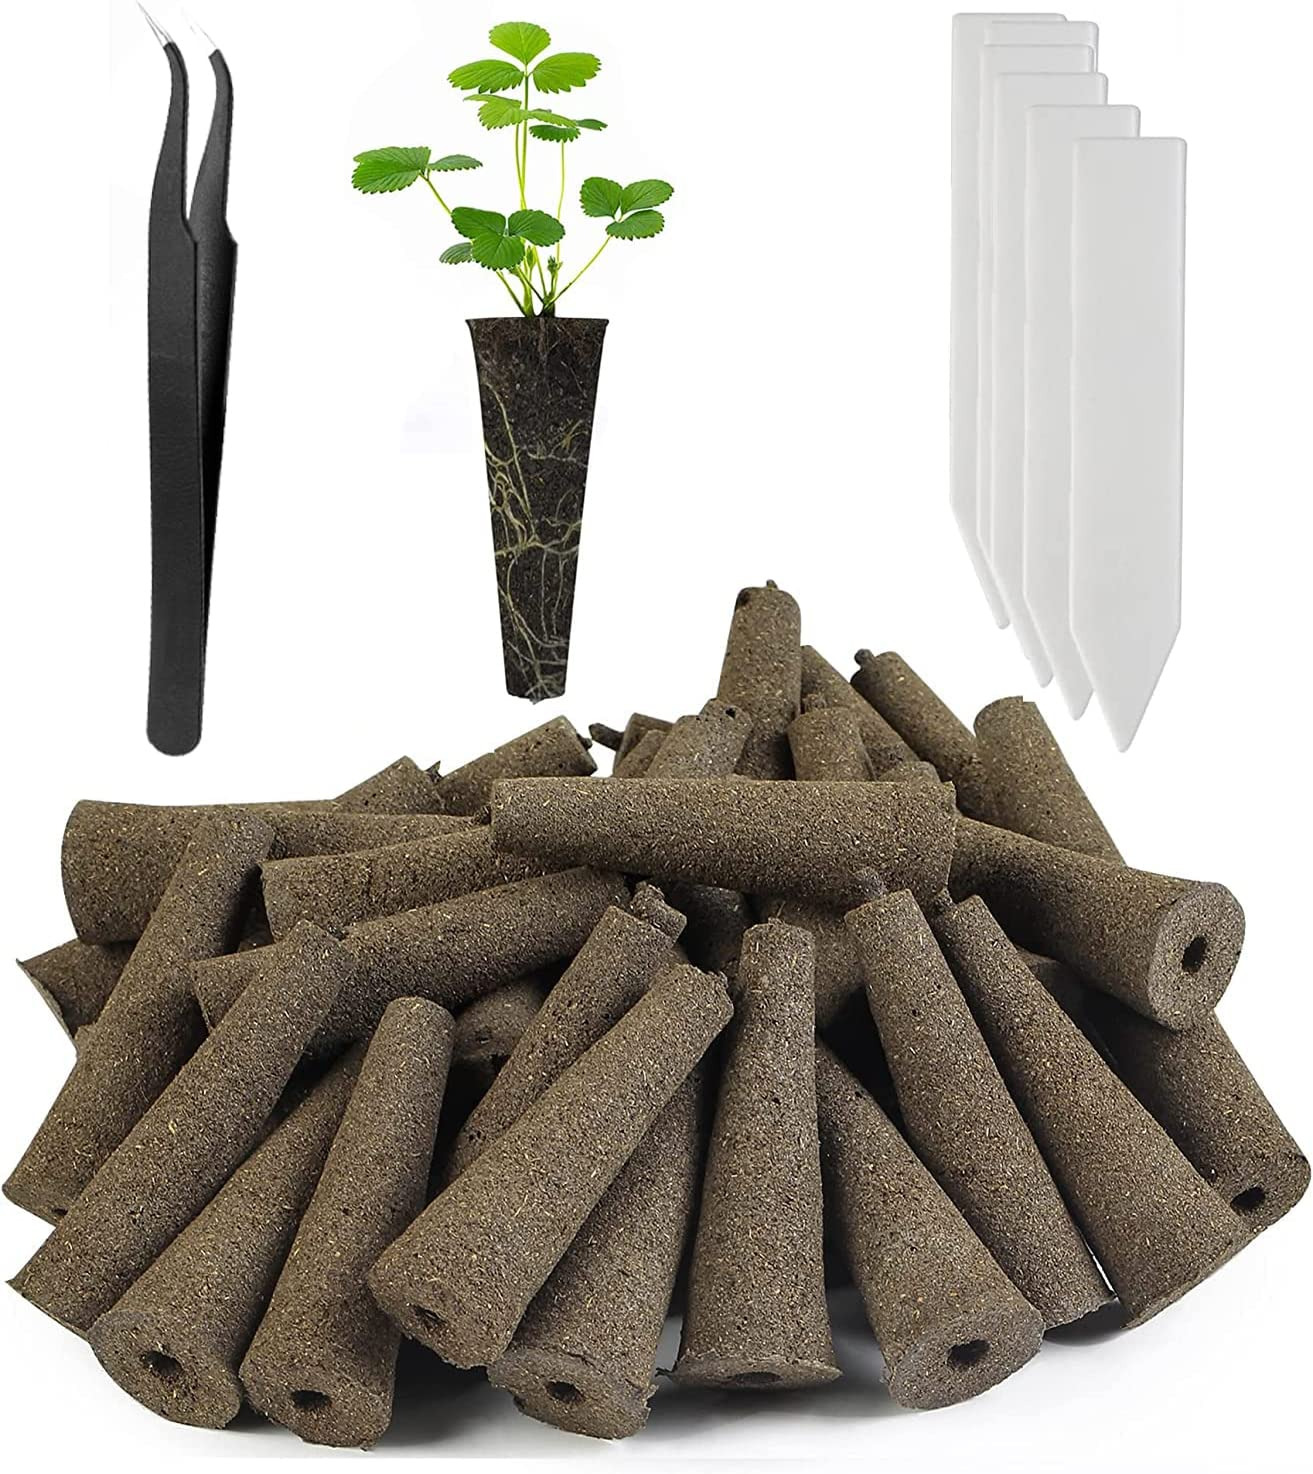 100 Pack Grow Sponges Replacement Root Growth Seed Pods for AeroGarden Seedling